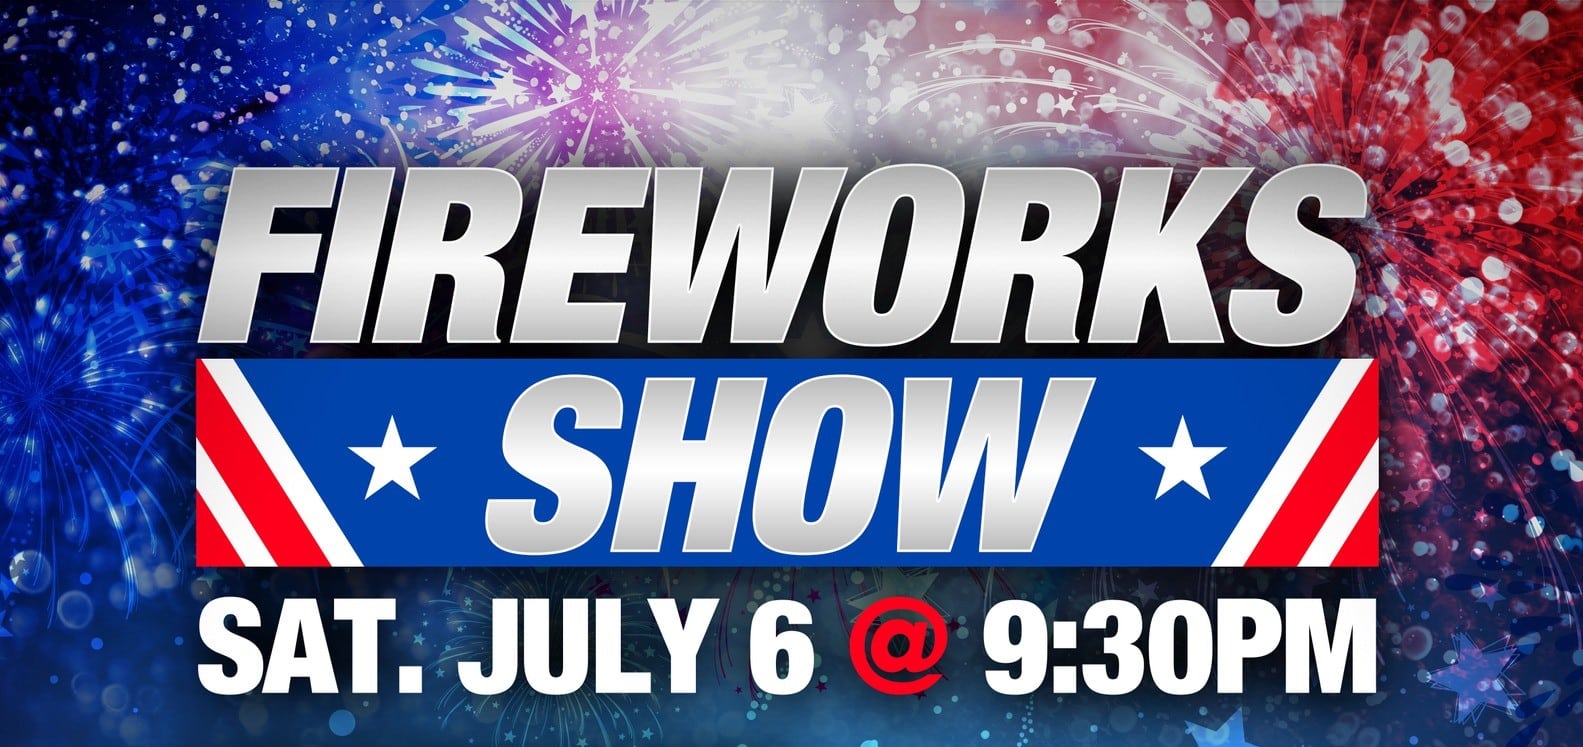 Fireworks Show sponsored by IronSenergy flyer for Saturday, July 6th at 9:30pm.